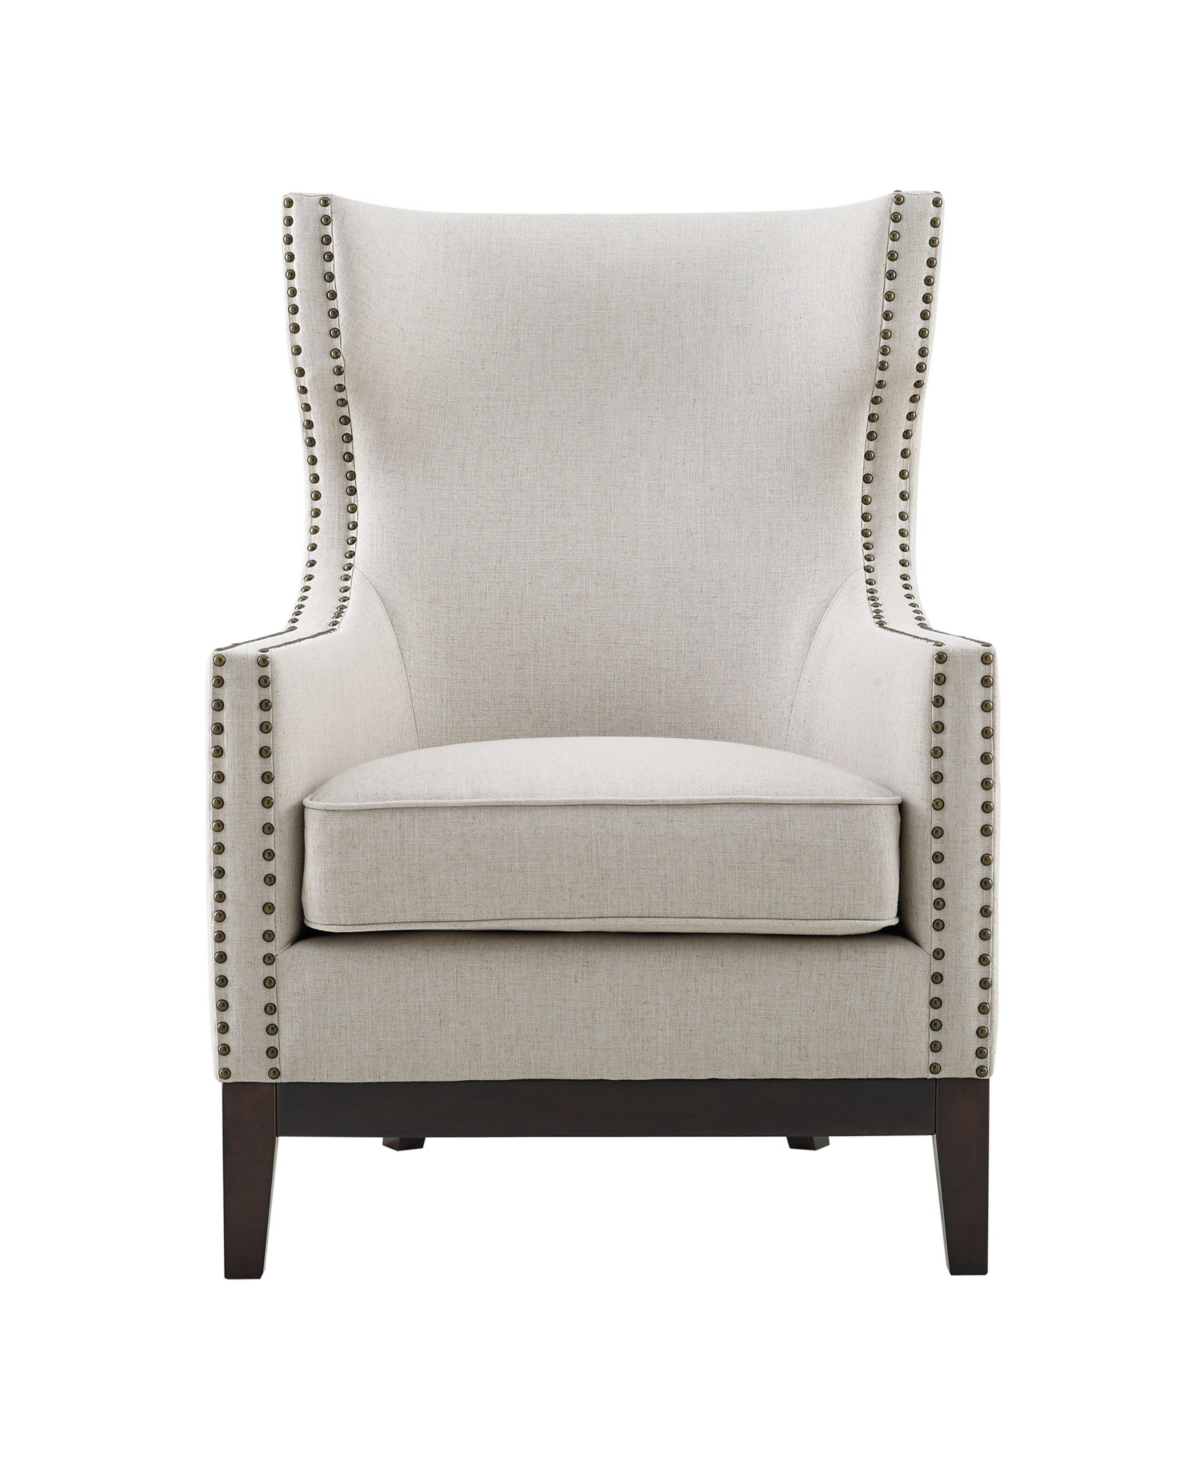 Steve Silver Roswell 29" Linen Accent Chair In Light Beige